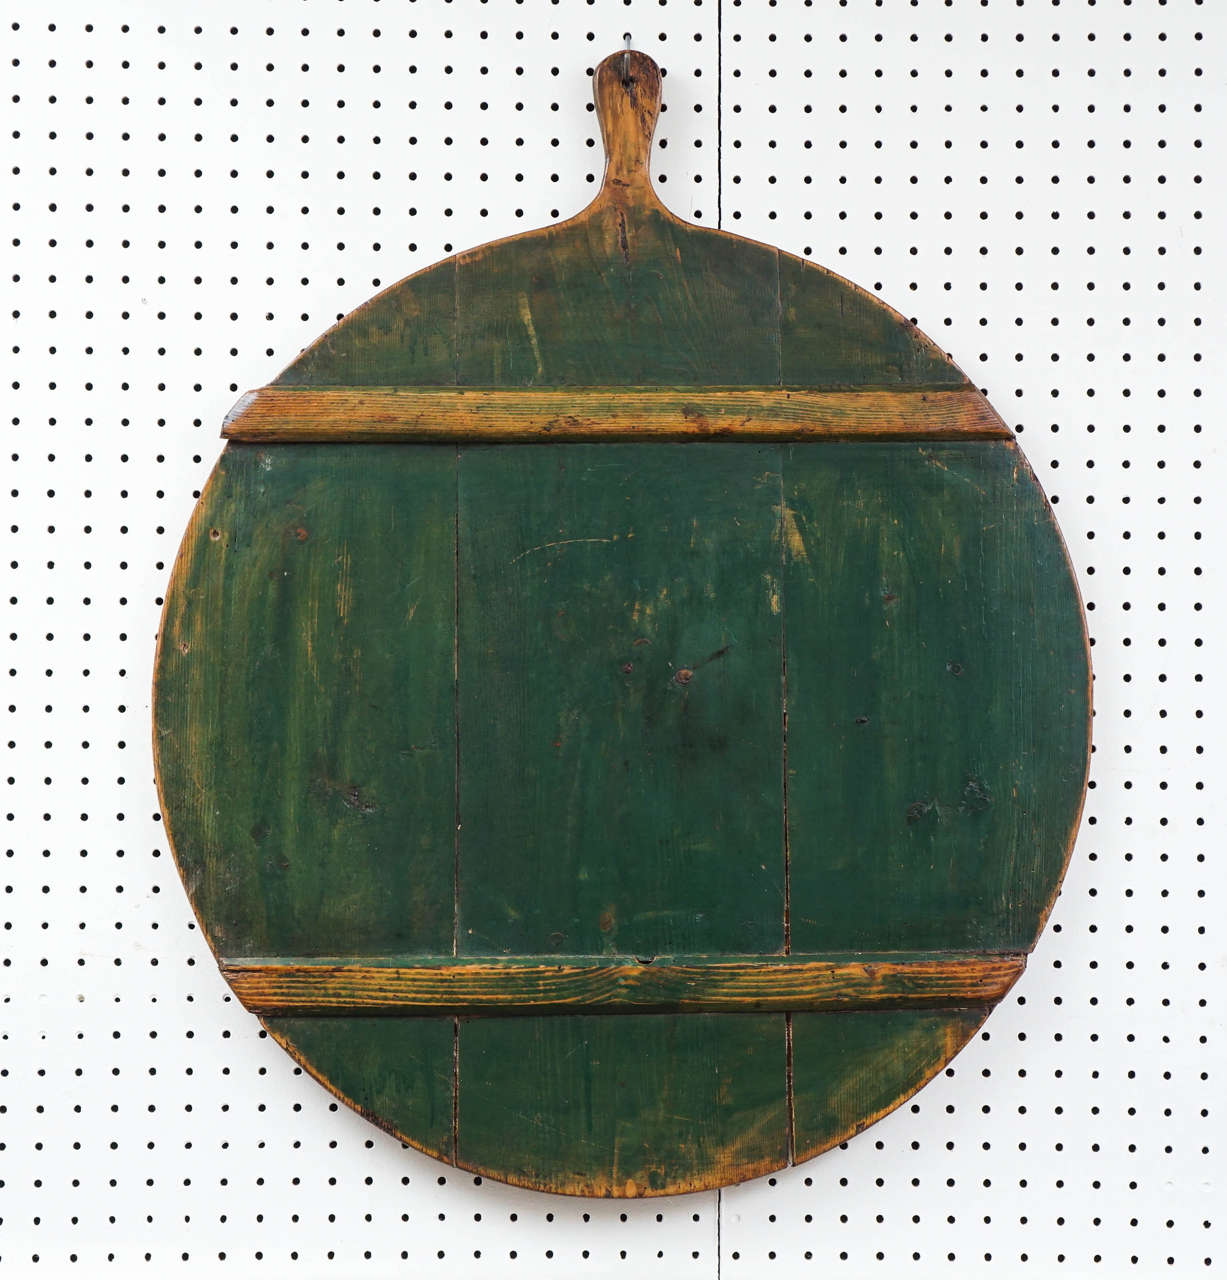 This English Peel board was used in England to peel potatoes. One side is in original stunning green paint and the other side is a rich pine. The runners on the painted side were used to give a sturdy surface while peeling. these pieces look great